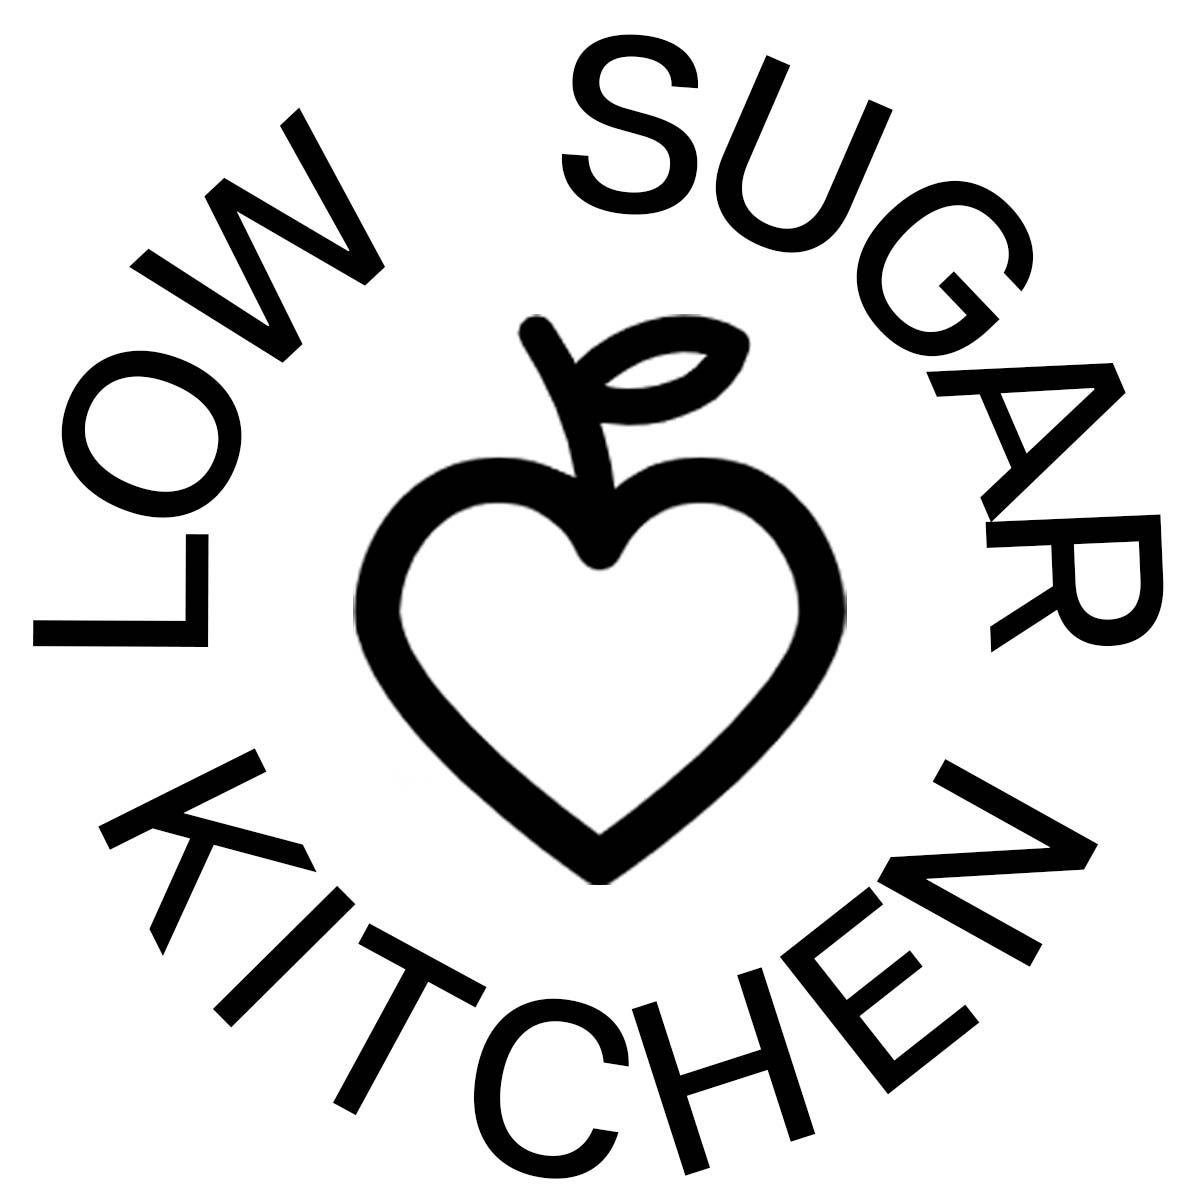 A heart shaped apple icon surrounded by the words low sugar kitchen.